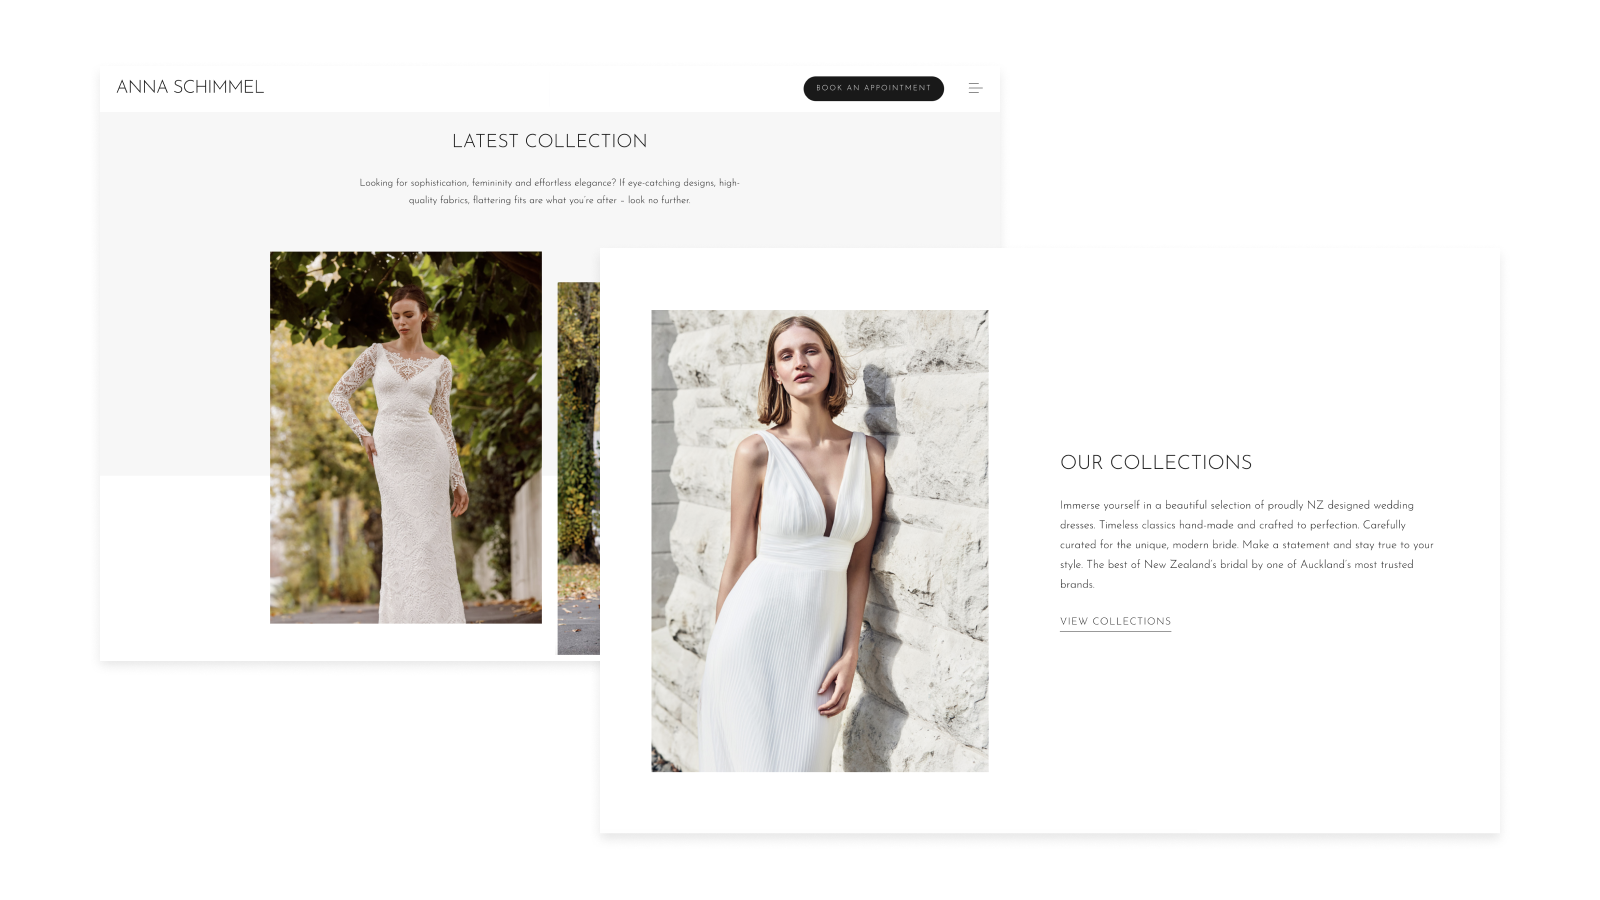 The Collection pages utiise elegant font and spacing with large photos of the product to highlight the elegant wedding dresses.